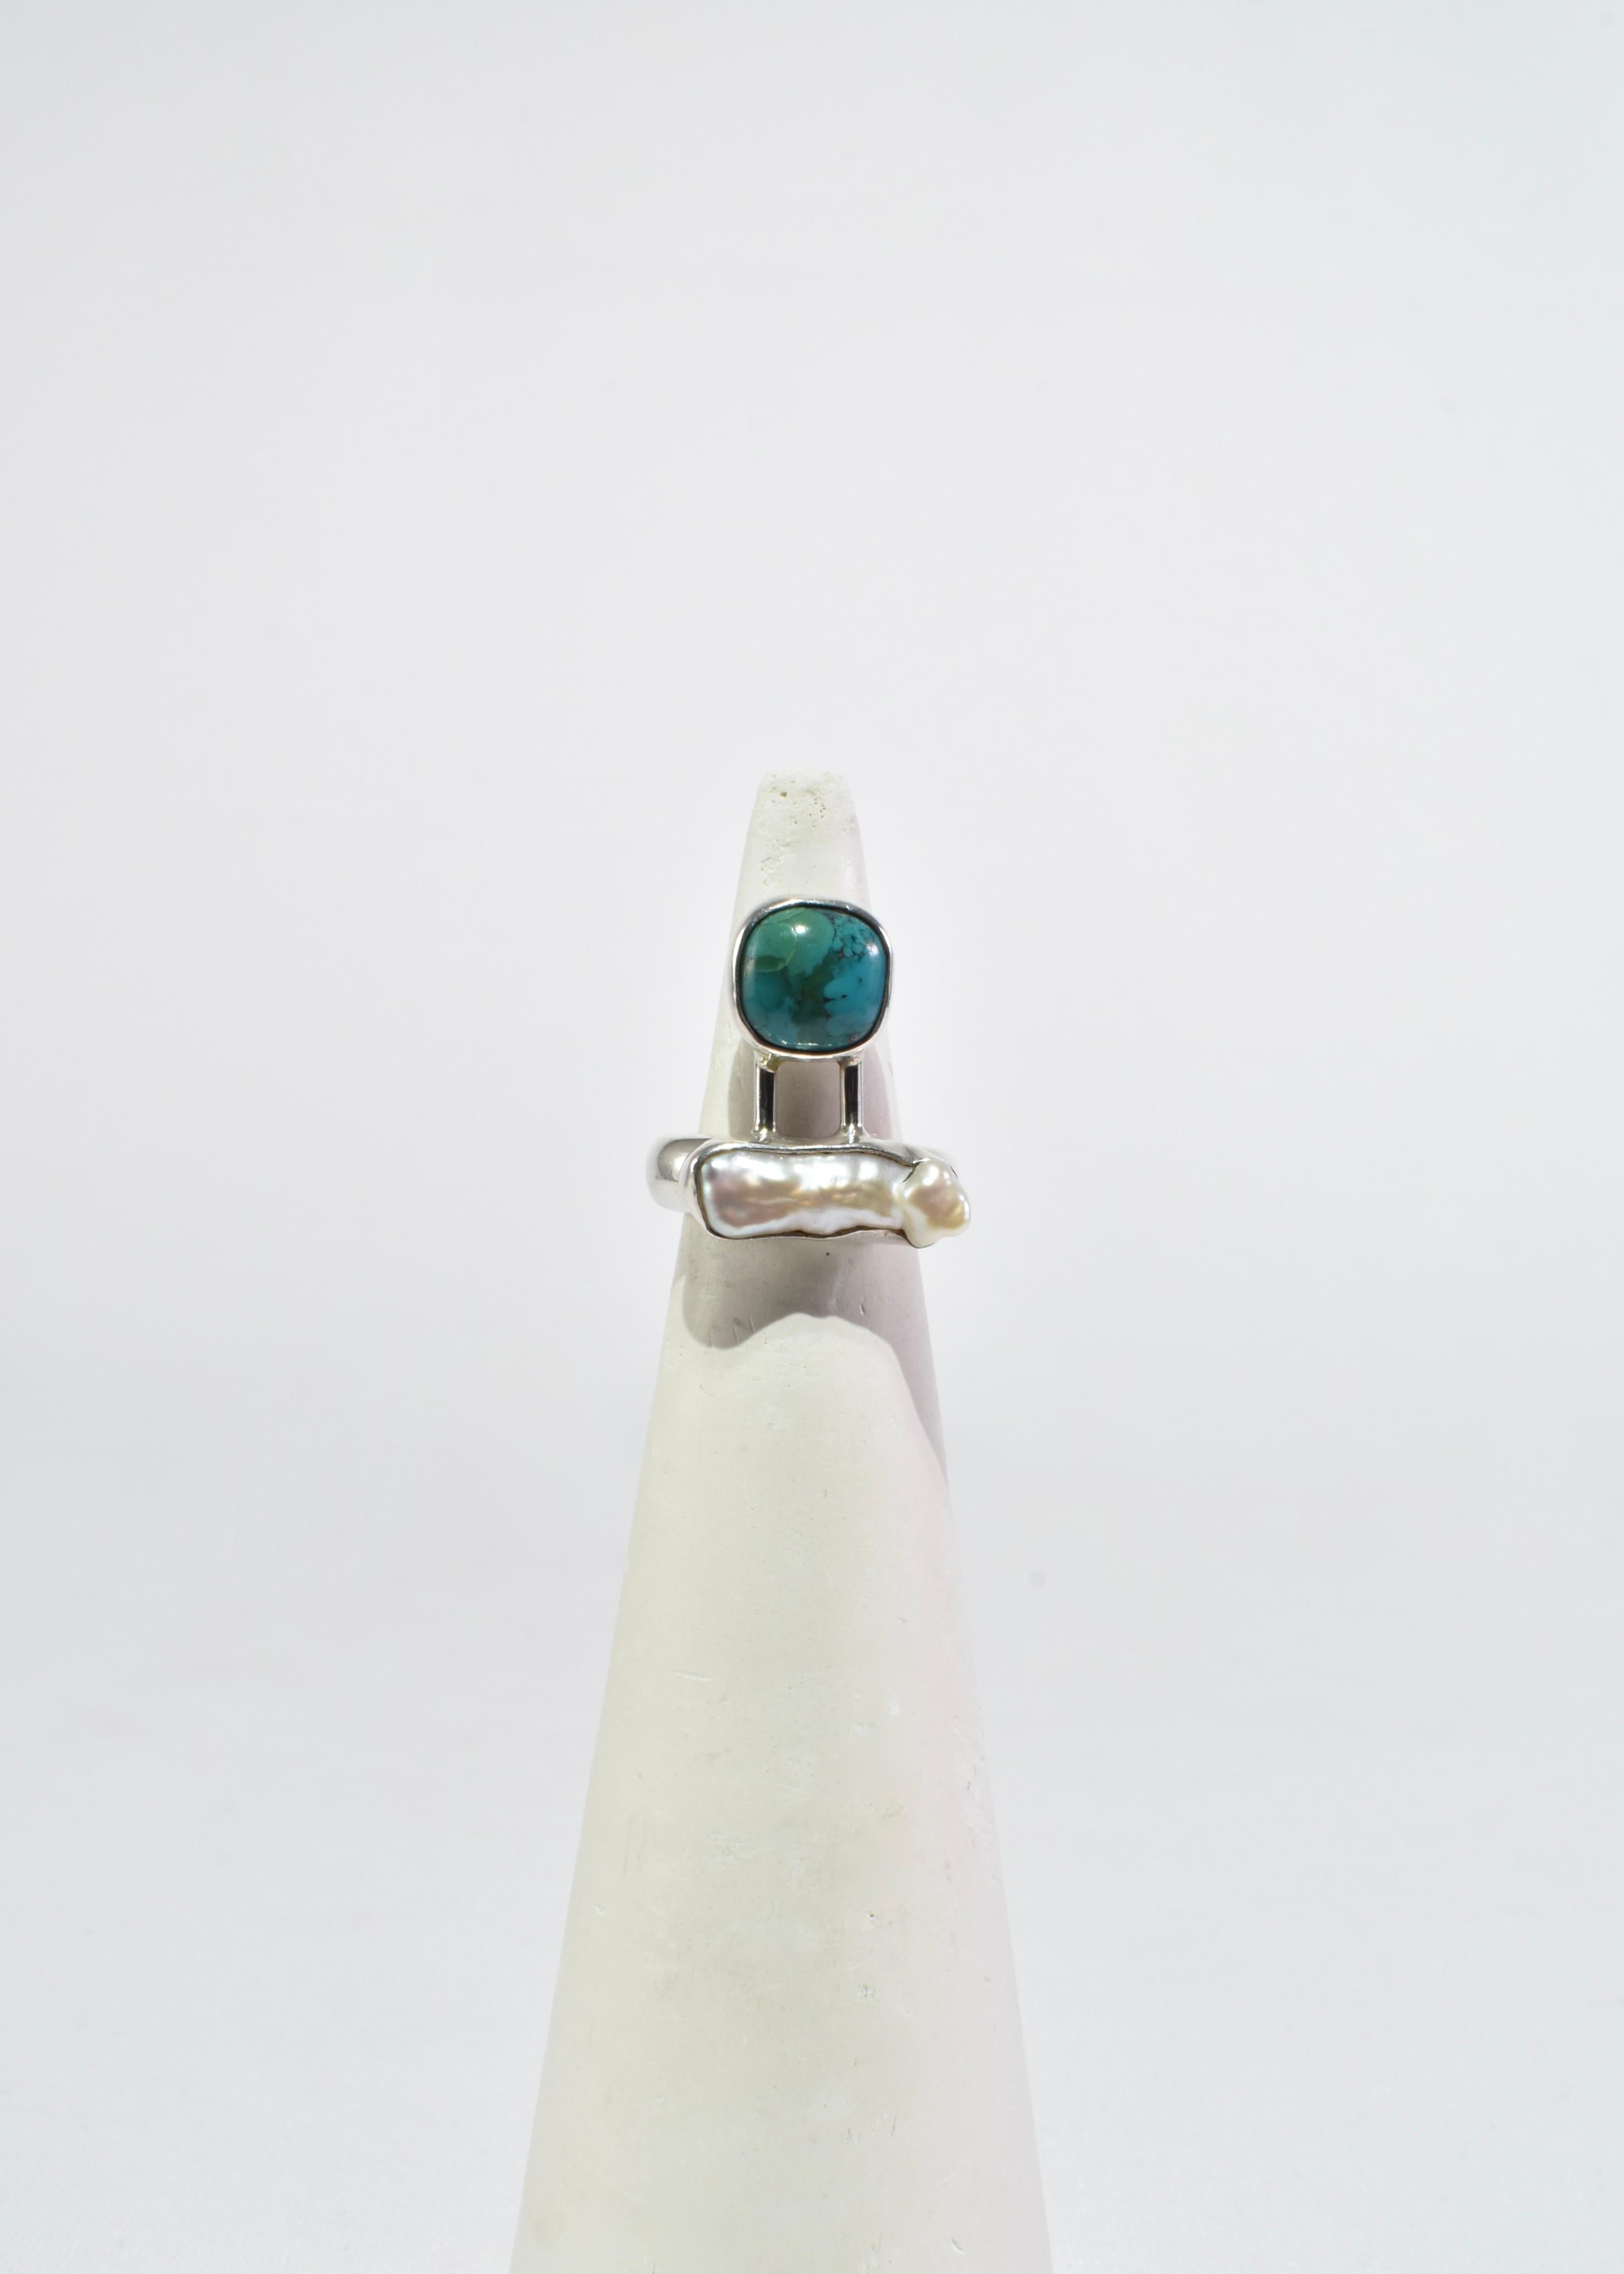 Pearl Turquoise Ring In Excellent Condition For Sale In Richmond, VA